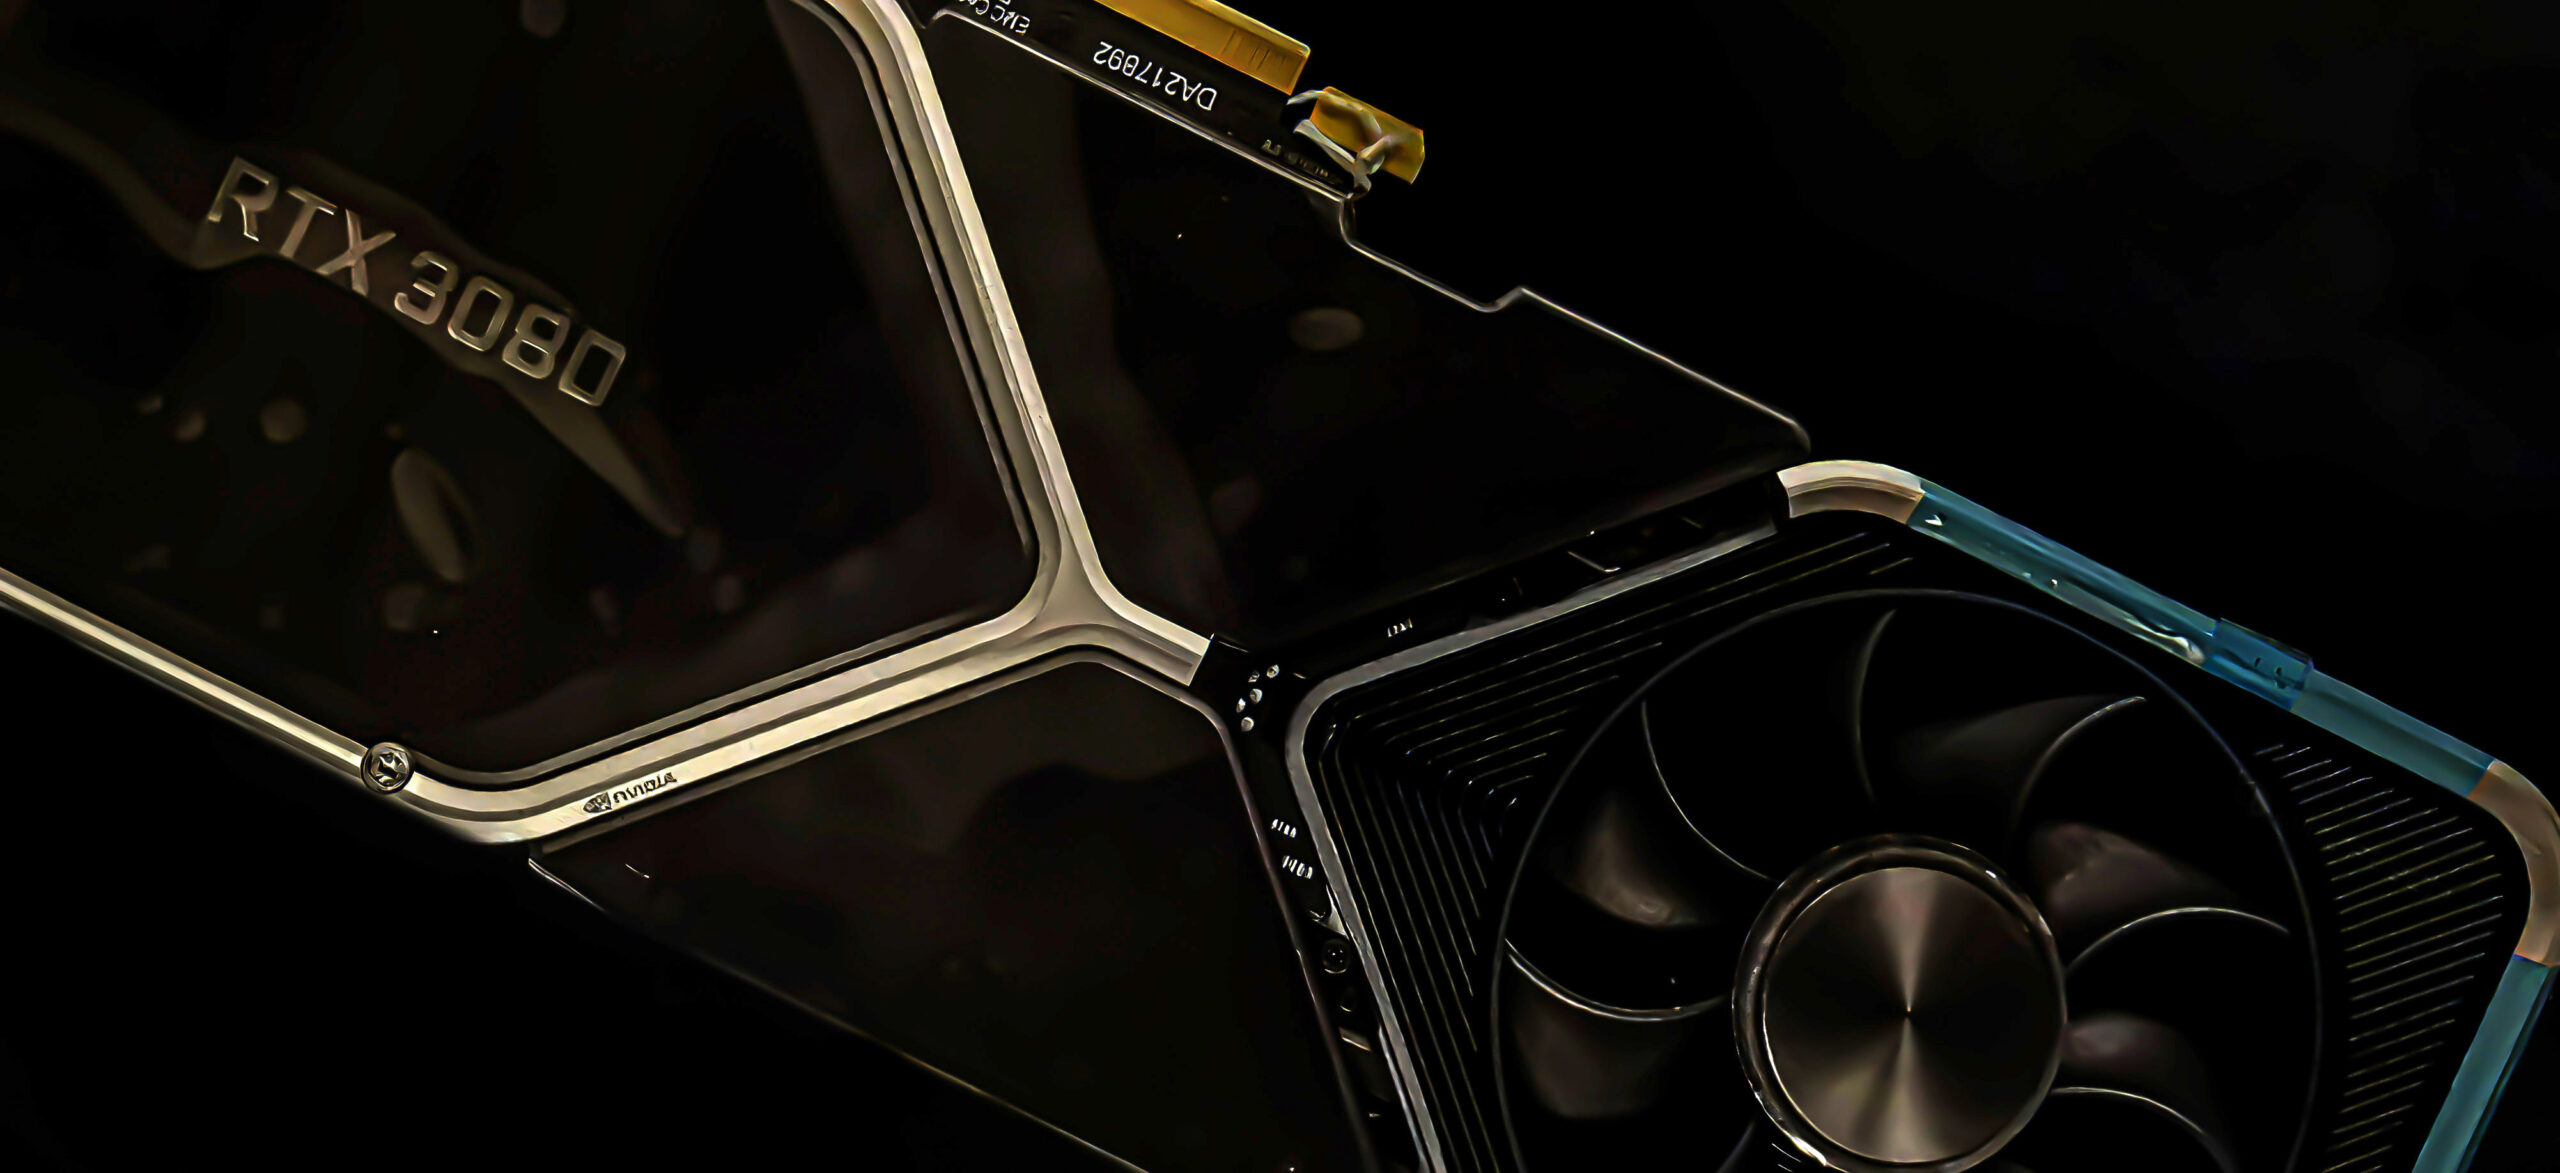 NVIDIA GeForce RTX 3090 Graphics Card Specs Leak Out